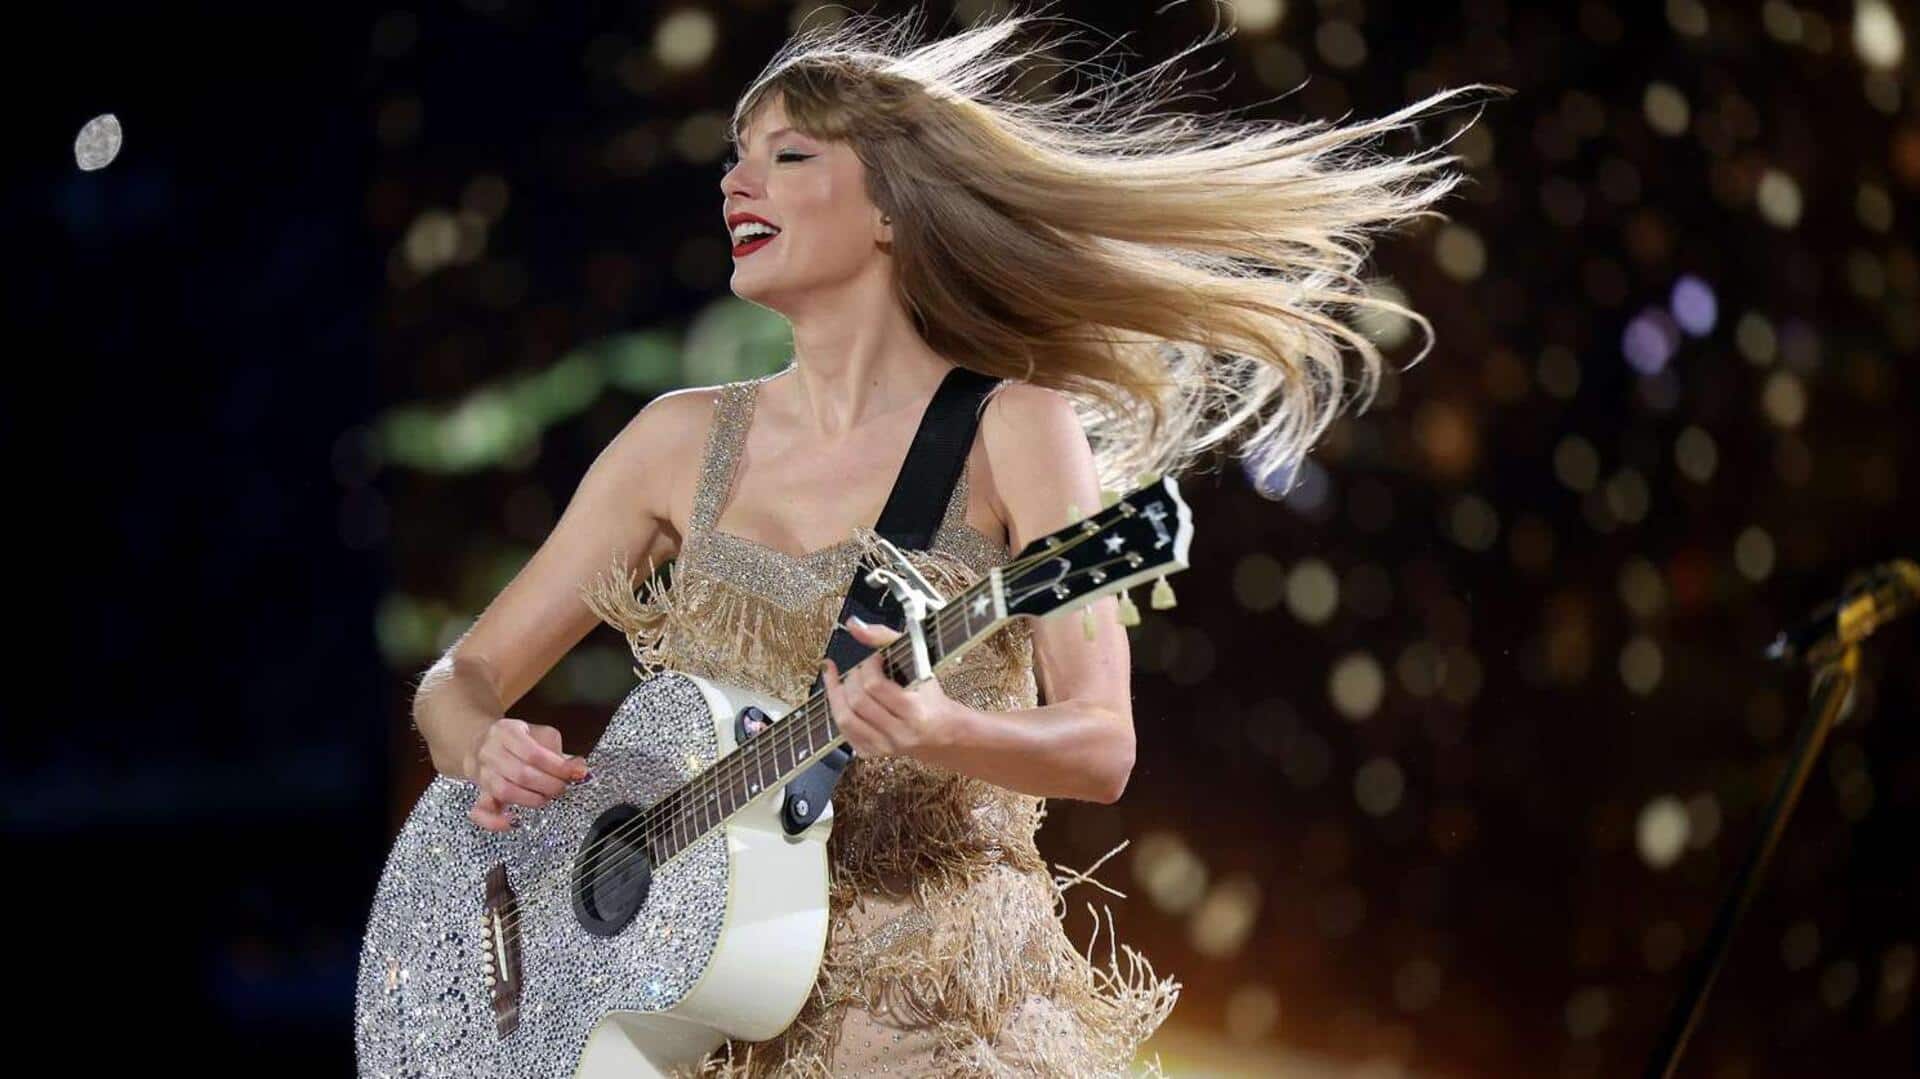 Taylor Swift's remixed track features in Apple TV+ docuseries